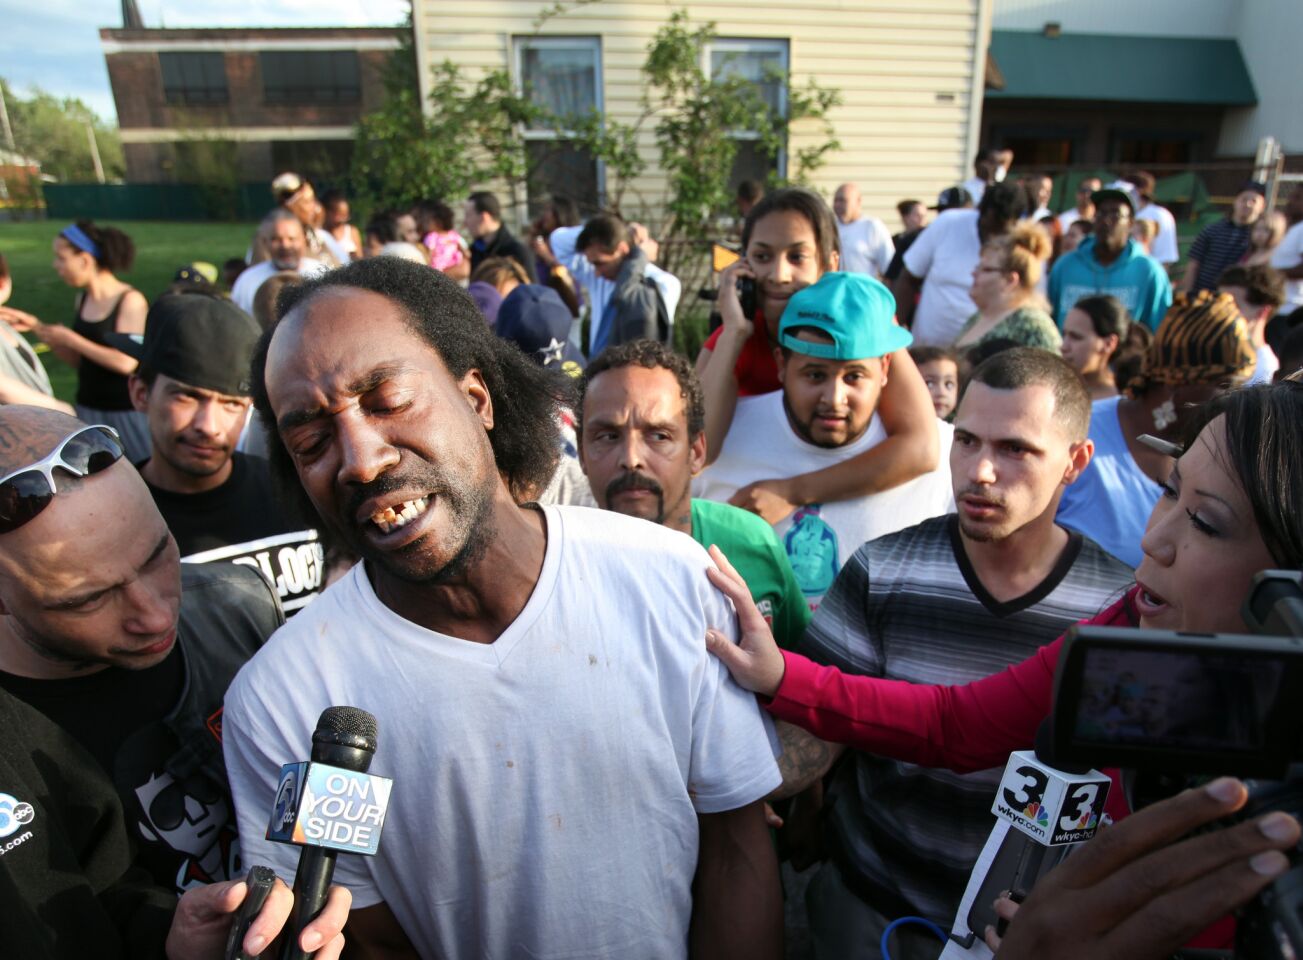 Charles Ramsey, who lives near the home where three missing women were rescued in Cleveland, speaks to reporters.